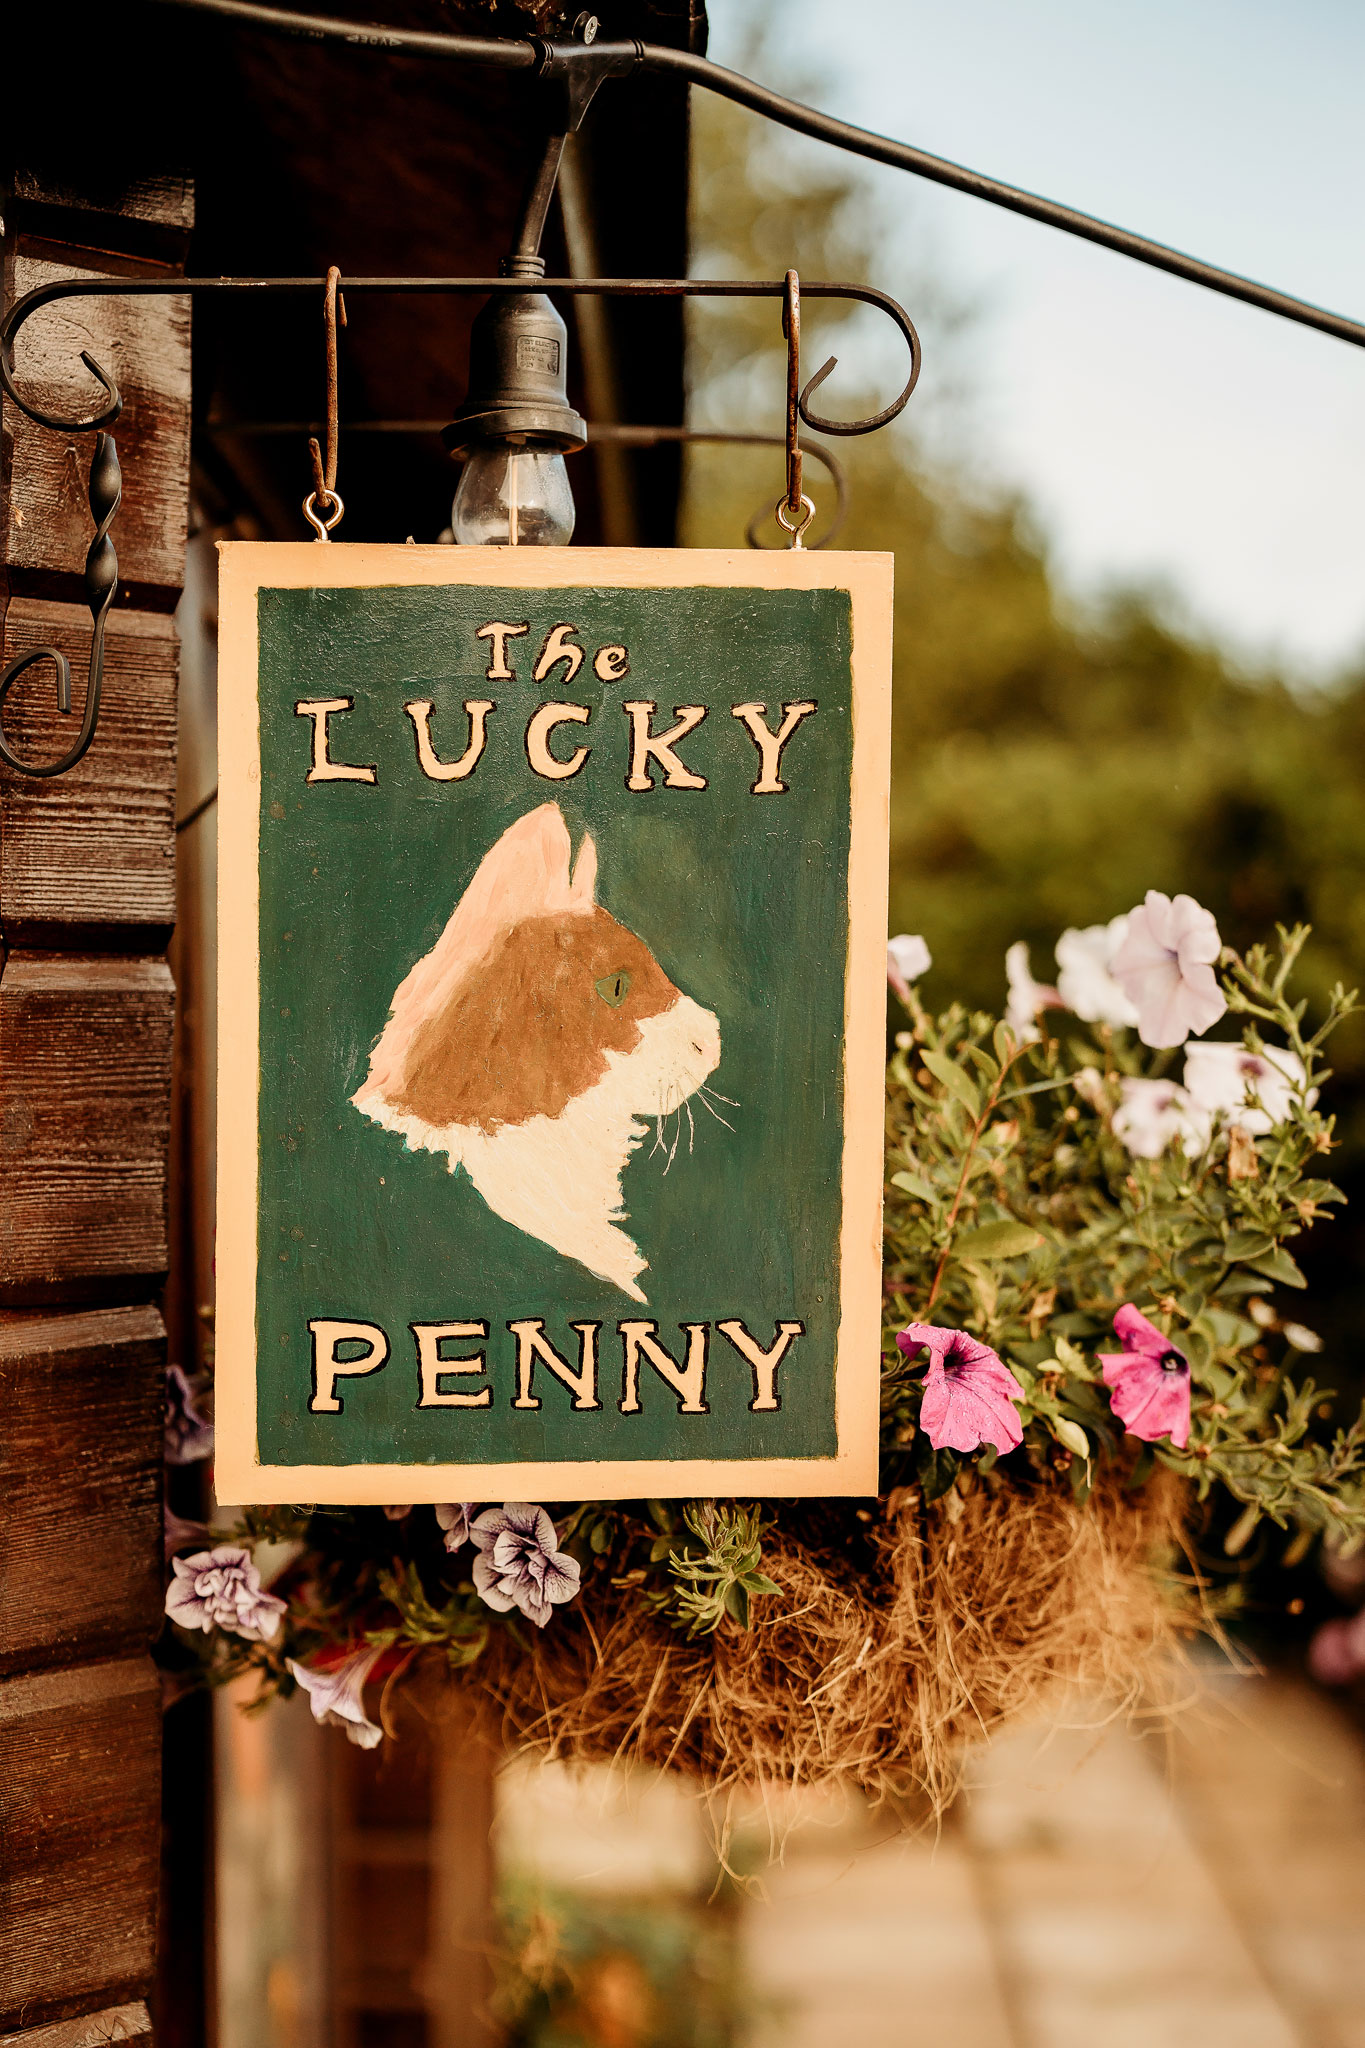 The lucky penny